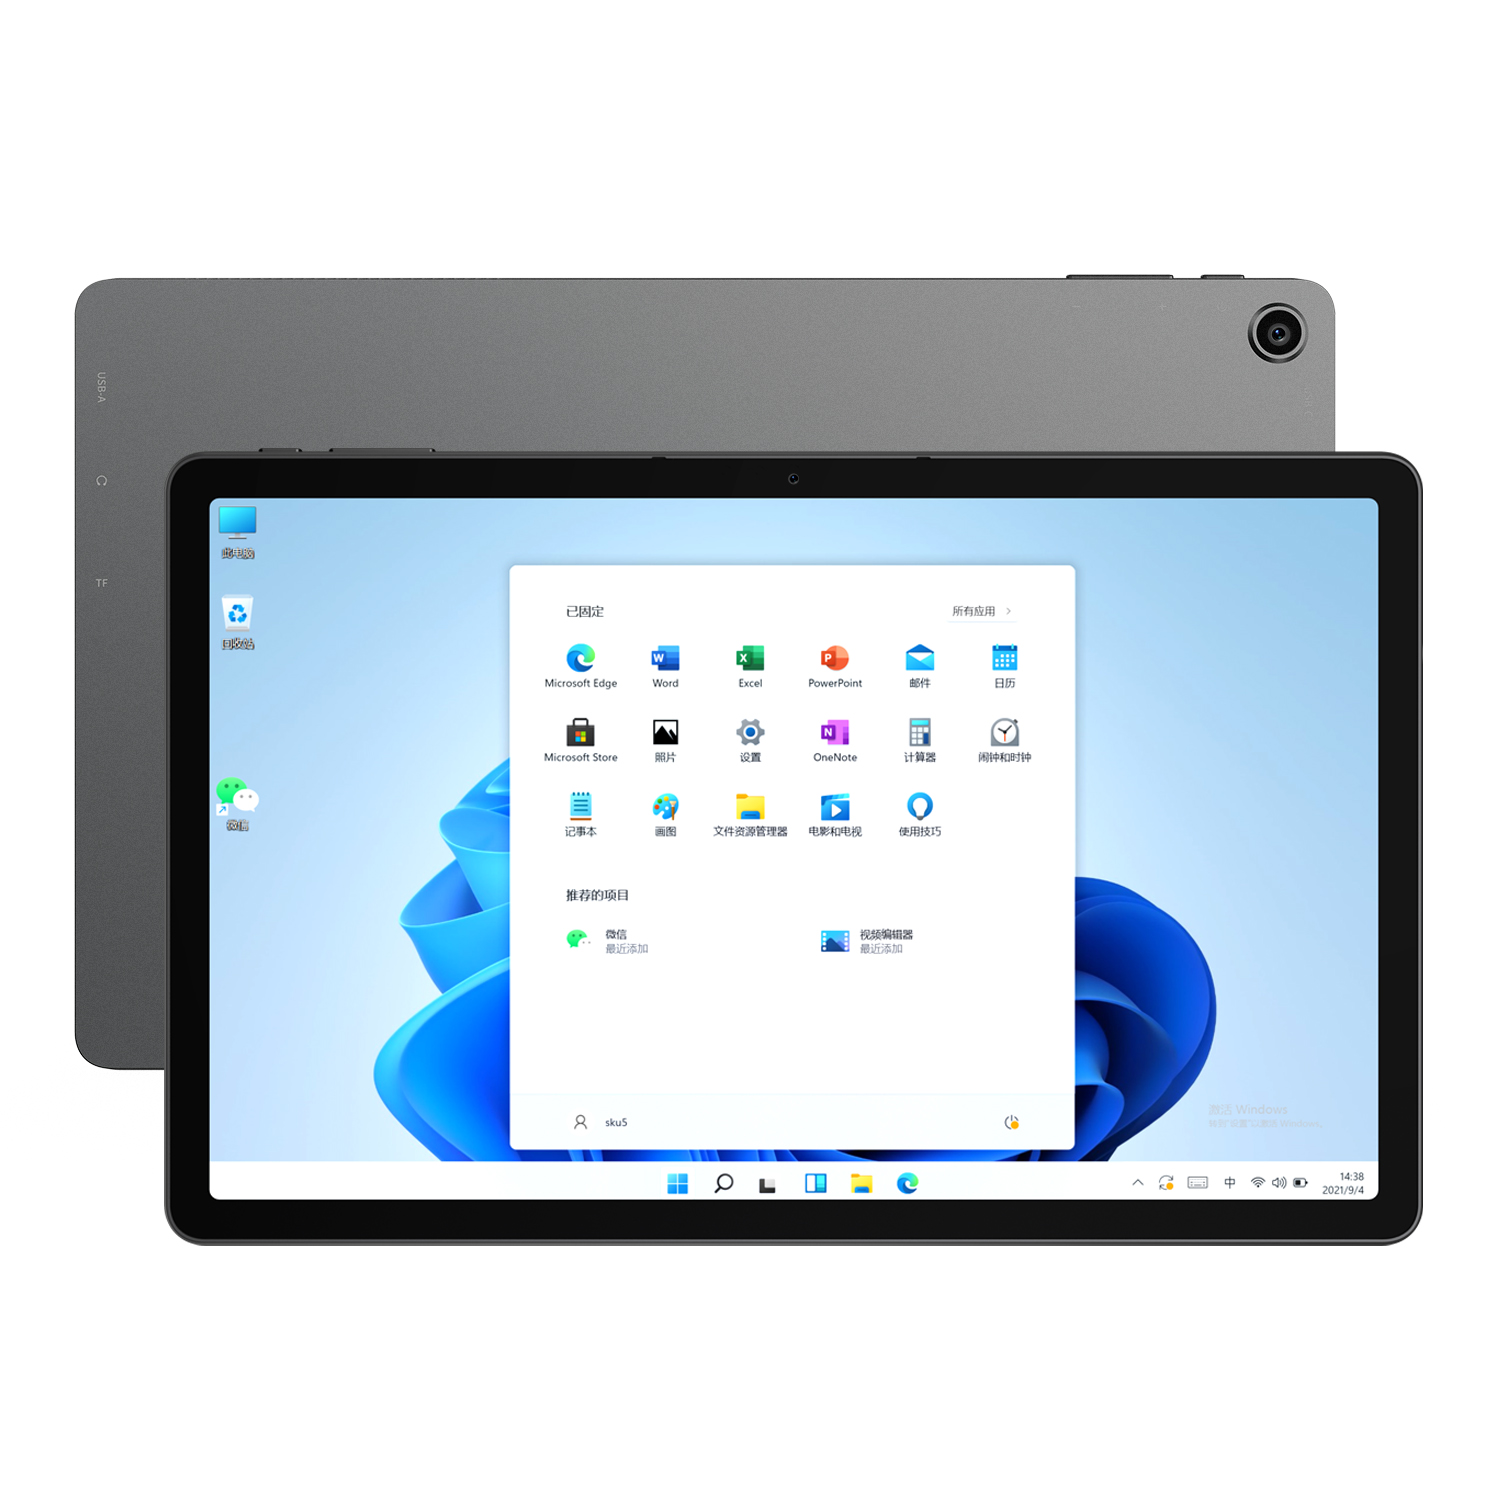 Find Alldocube iWork GT Intel I5 1115G7 Quad Core 8GB ROM 256GB SSD 2K Screen 11 Inch WiFi6 Windows 11 Tablet for Sale on Gipsybee.com with cryptocurrencies